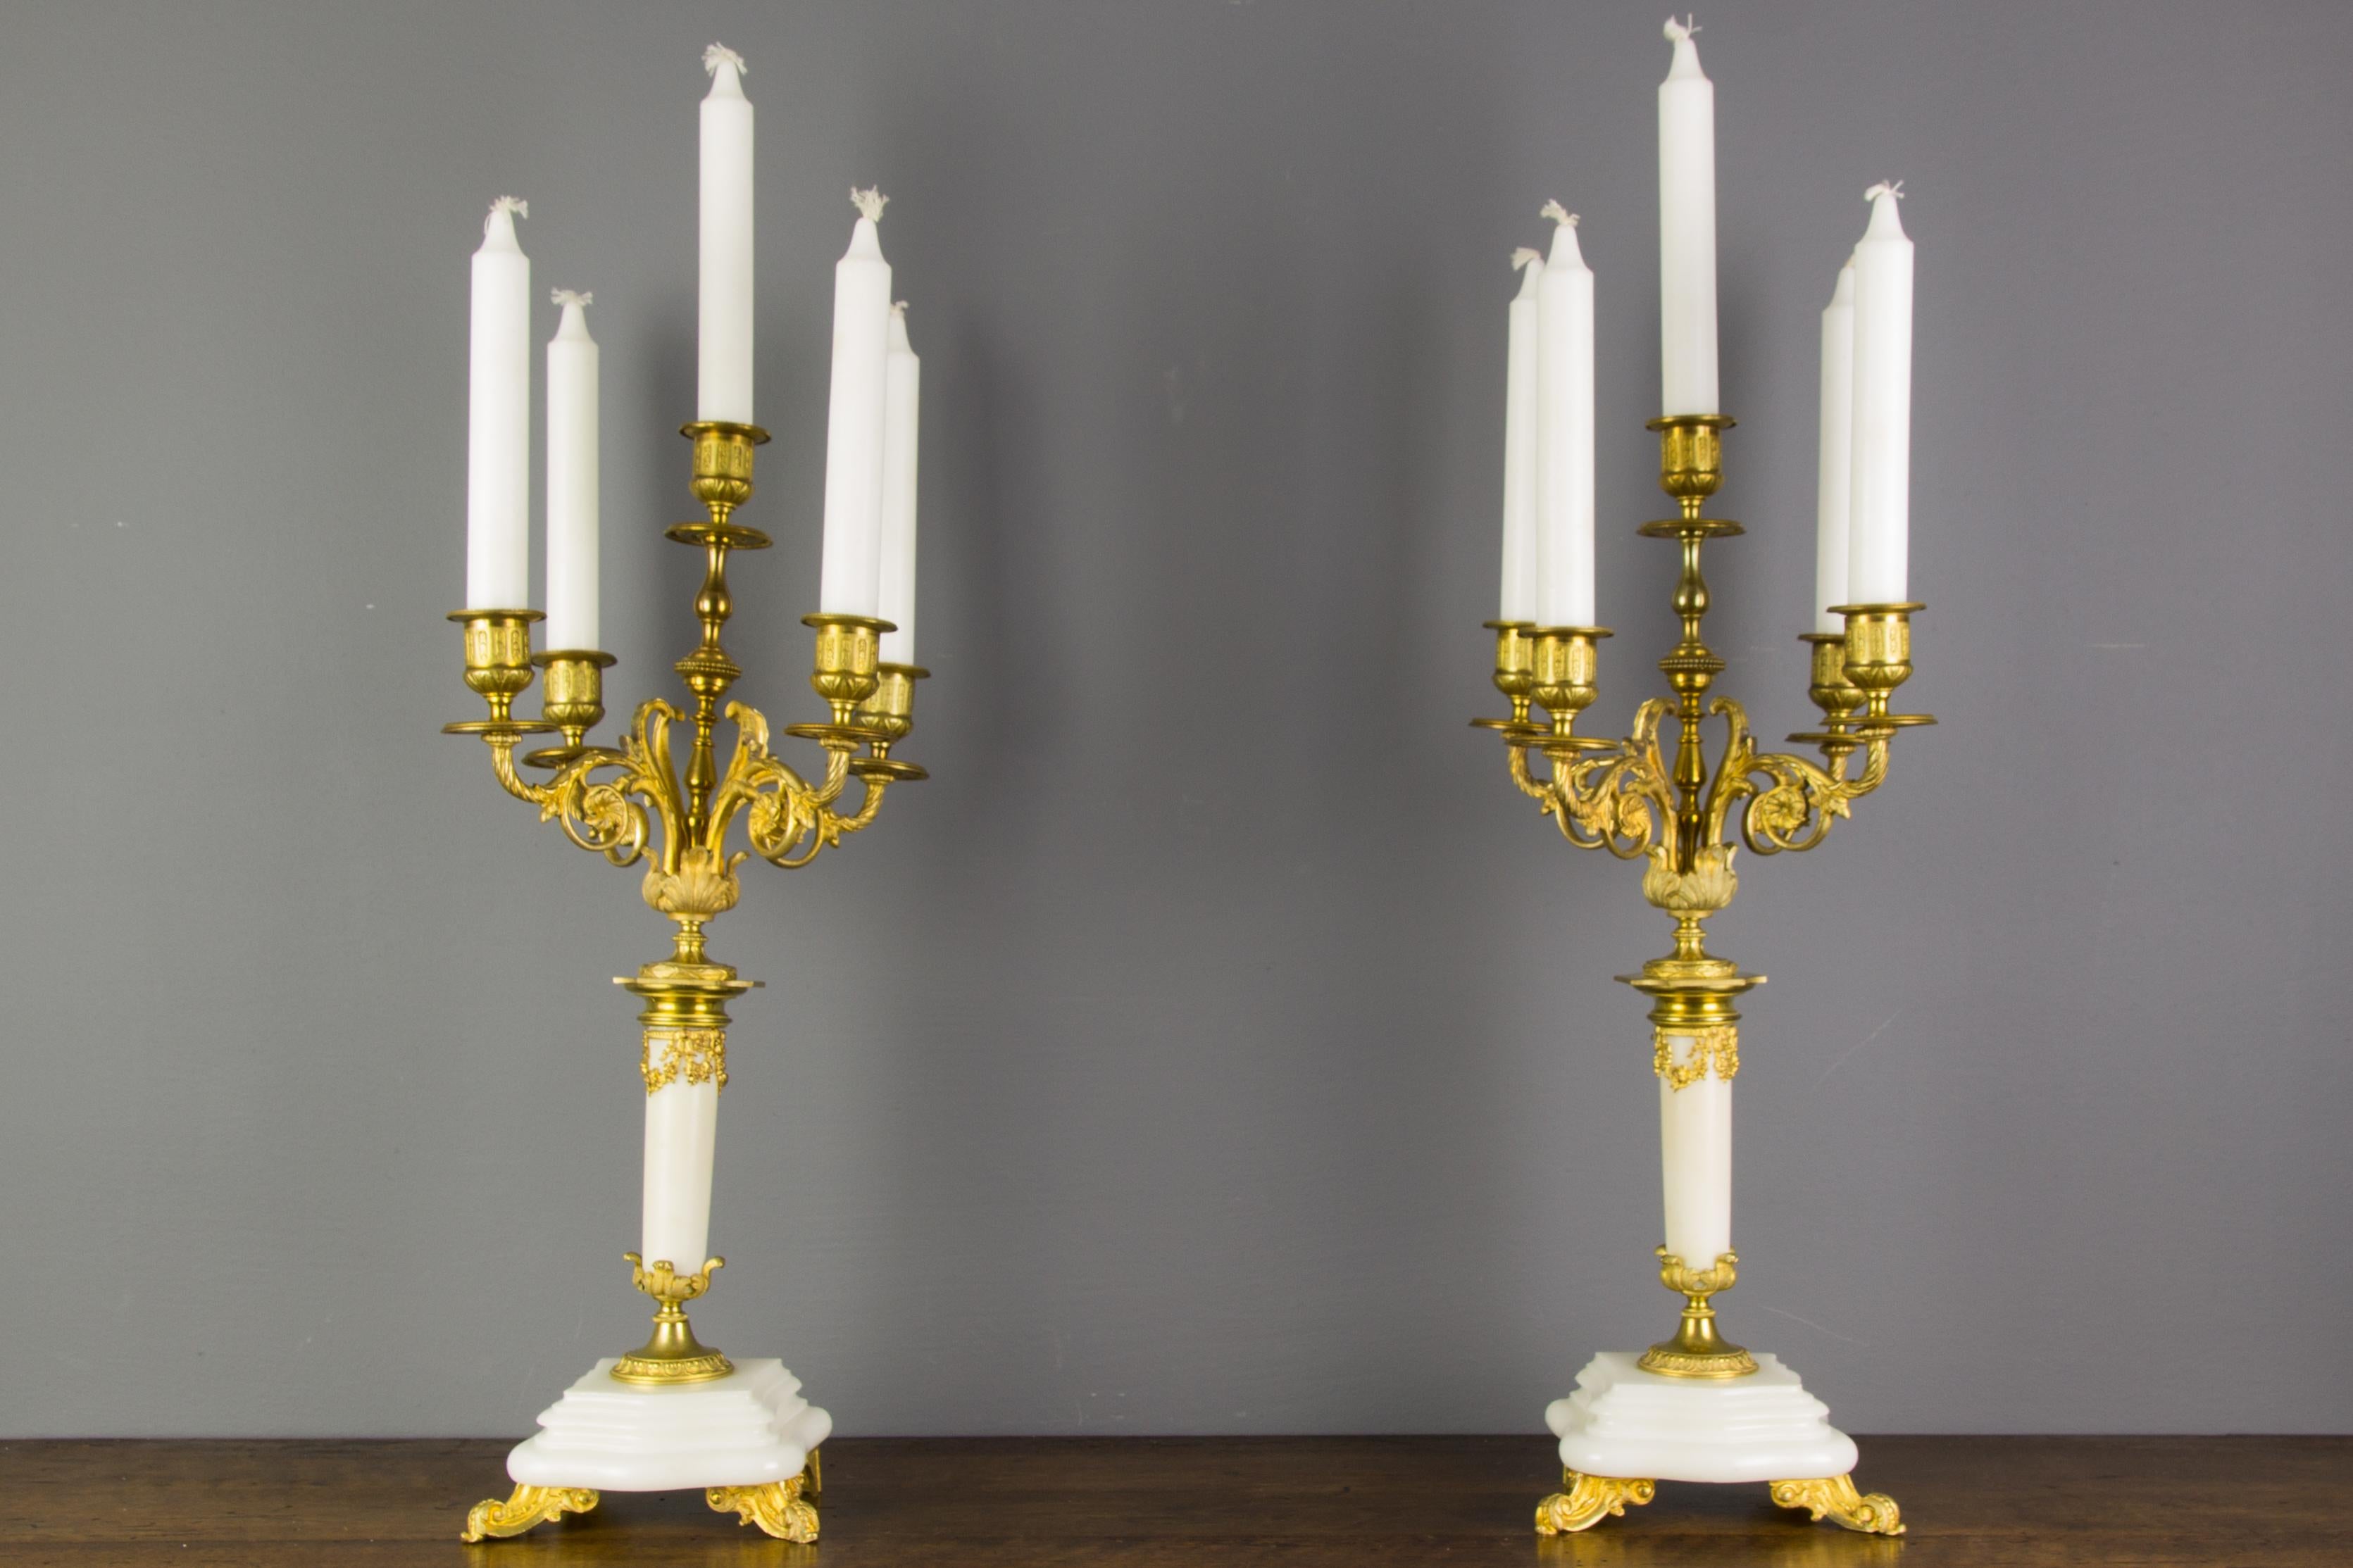 Beautiful pair of white marble and gilt bronze five-light candelabras. The marble is wonderfully sculptured in lovely curved detail. Each gilt bronze arm is decorated with an interior ‘C’ scroll design with floral rosettes amid acanthus leaves.